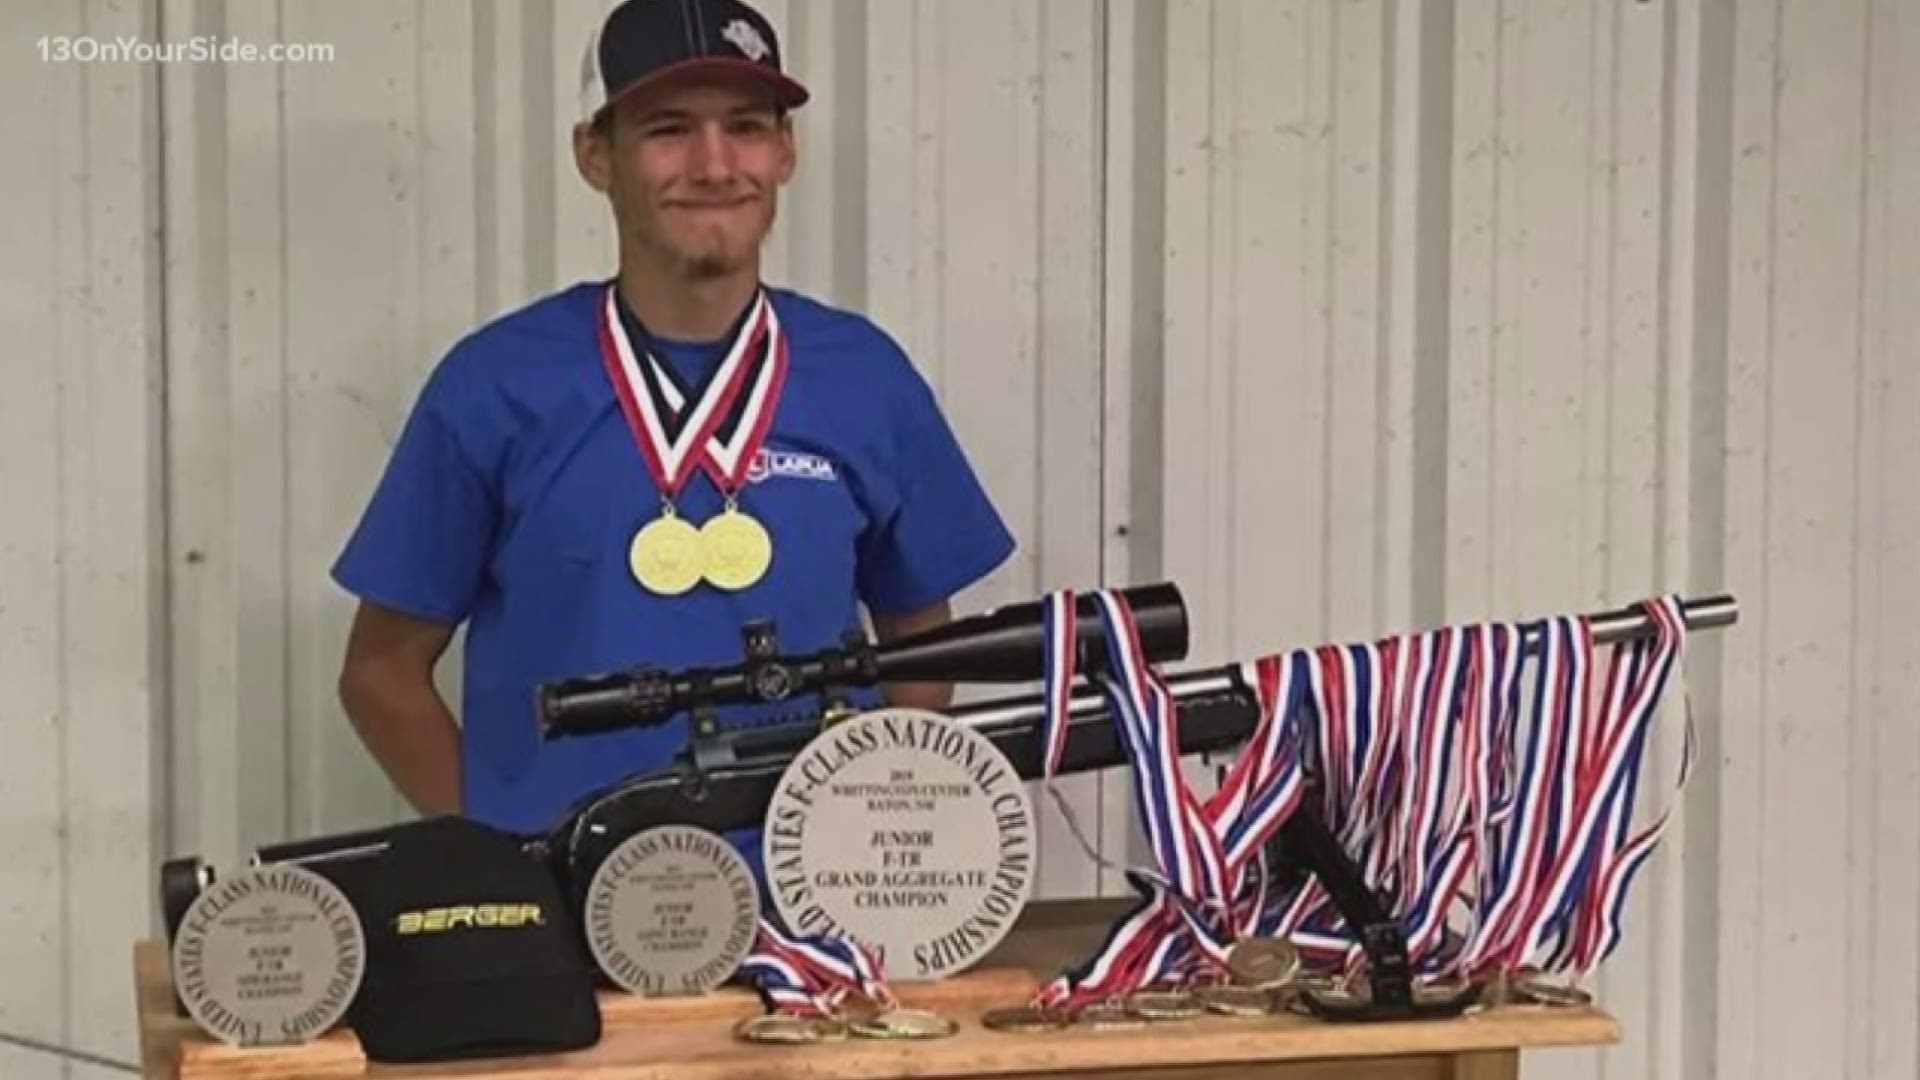 17-year-old Austin Nelson earned 28 medals, three plaques and three trophies at the U.S. F-Class National Championships in New Mexico last month.